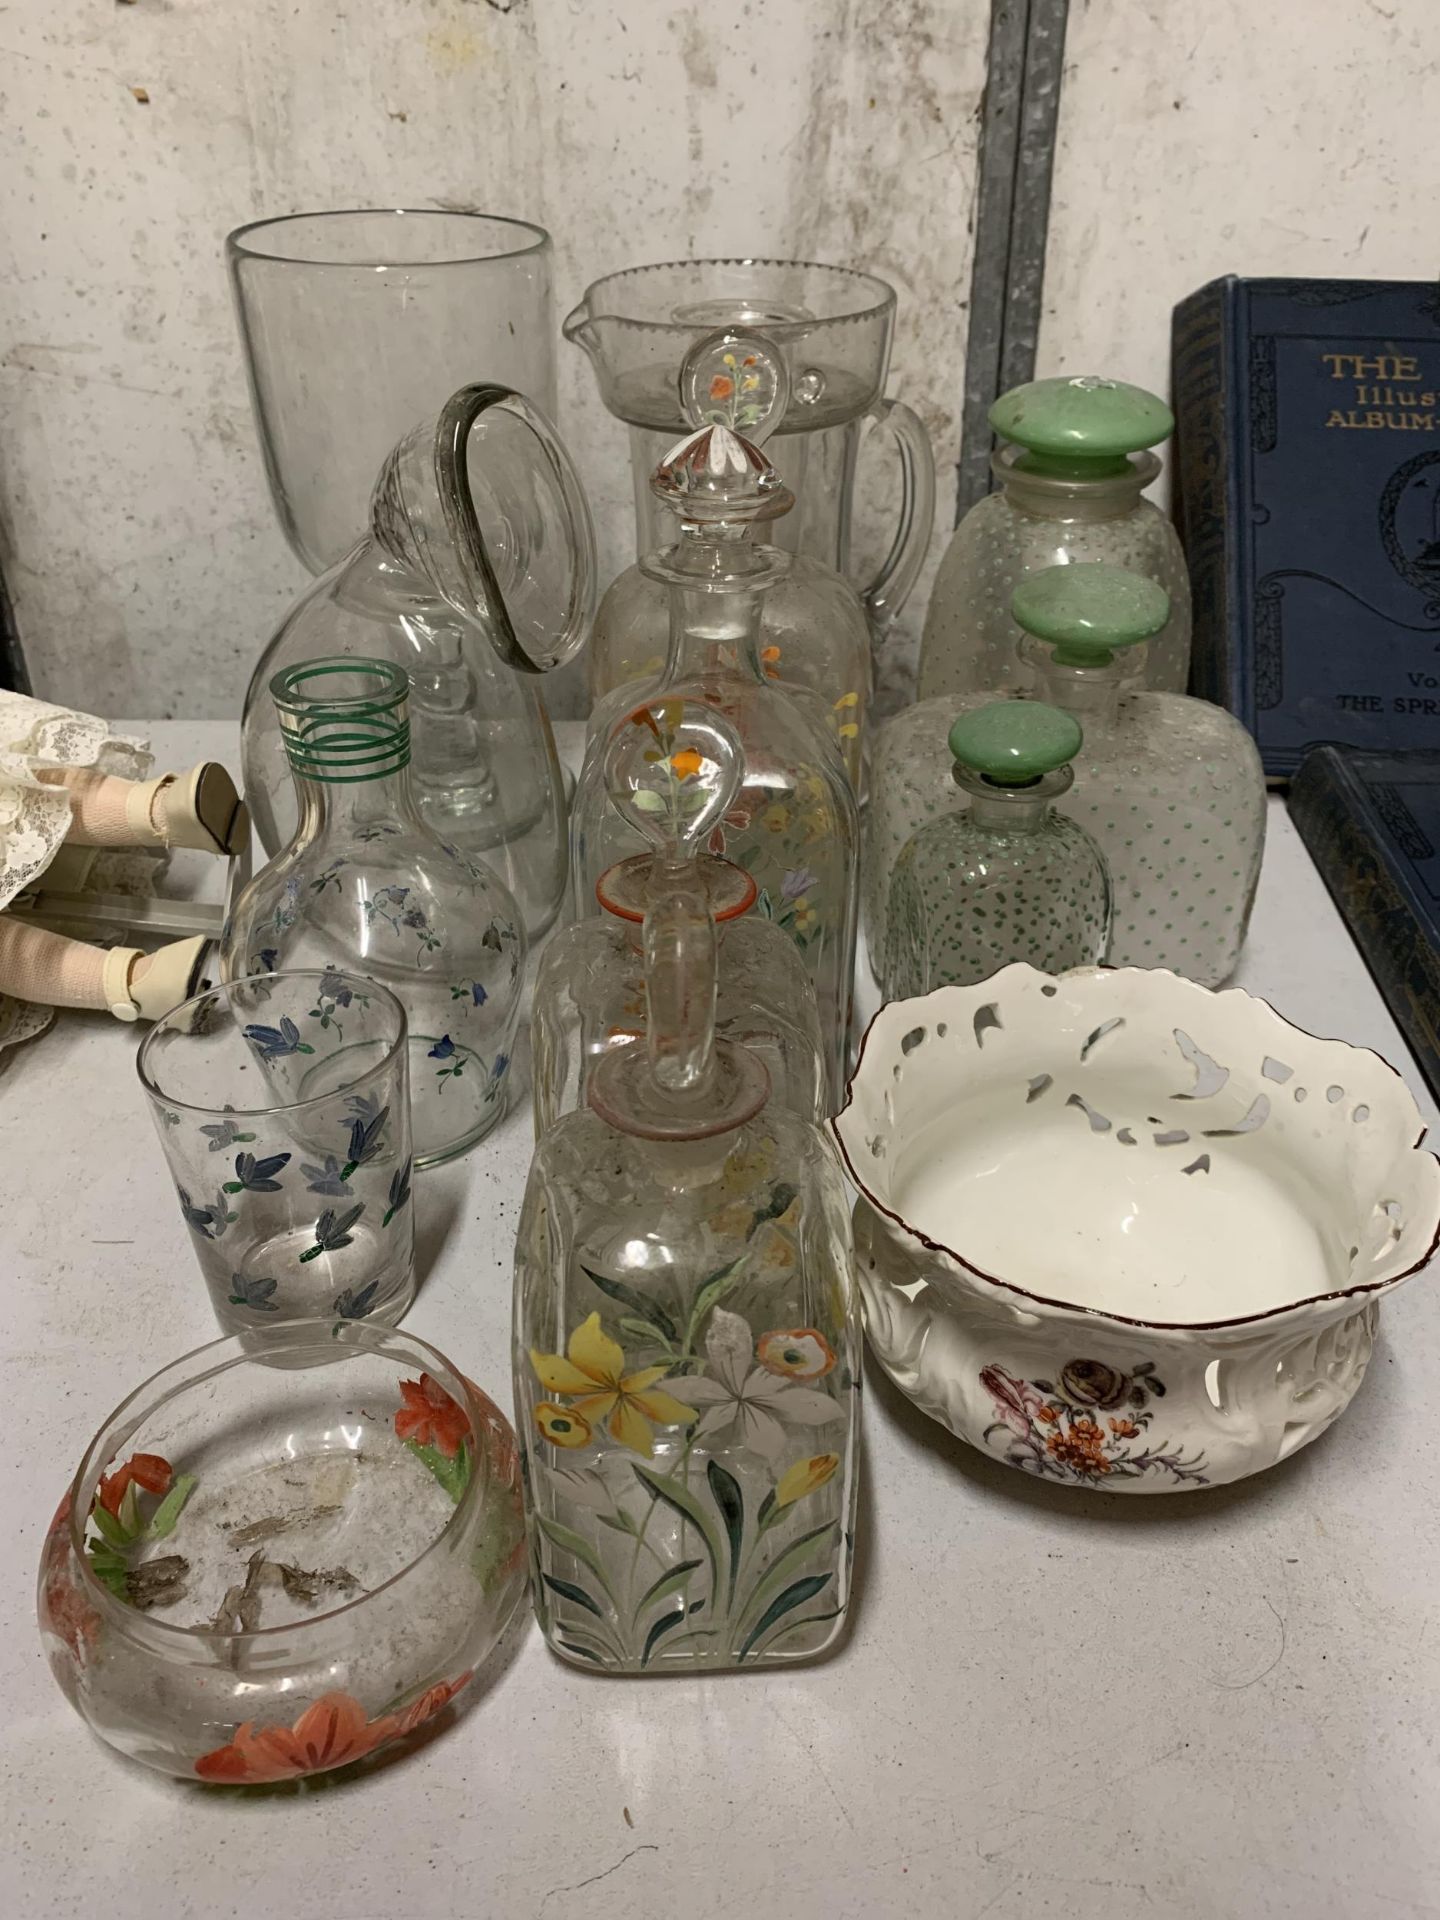 A QUANTITY OF VINTAGE GLASSWARE TO INCLUDE HANDPAINTED DECANTERS, JARS, JUGS, CANDLE HOLDER, ETC